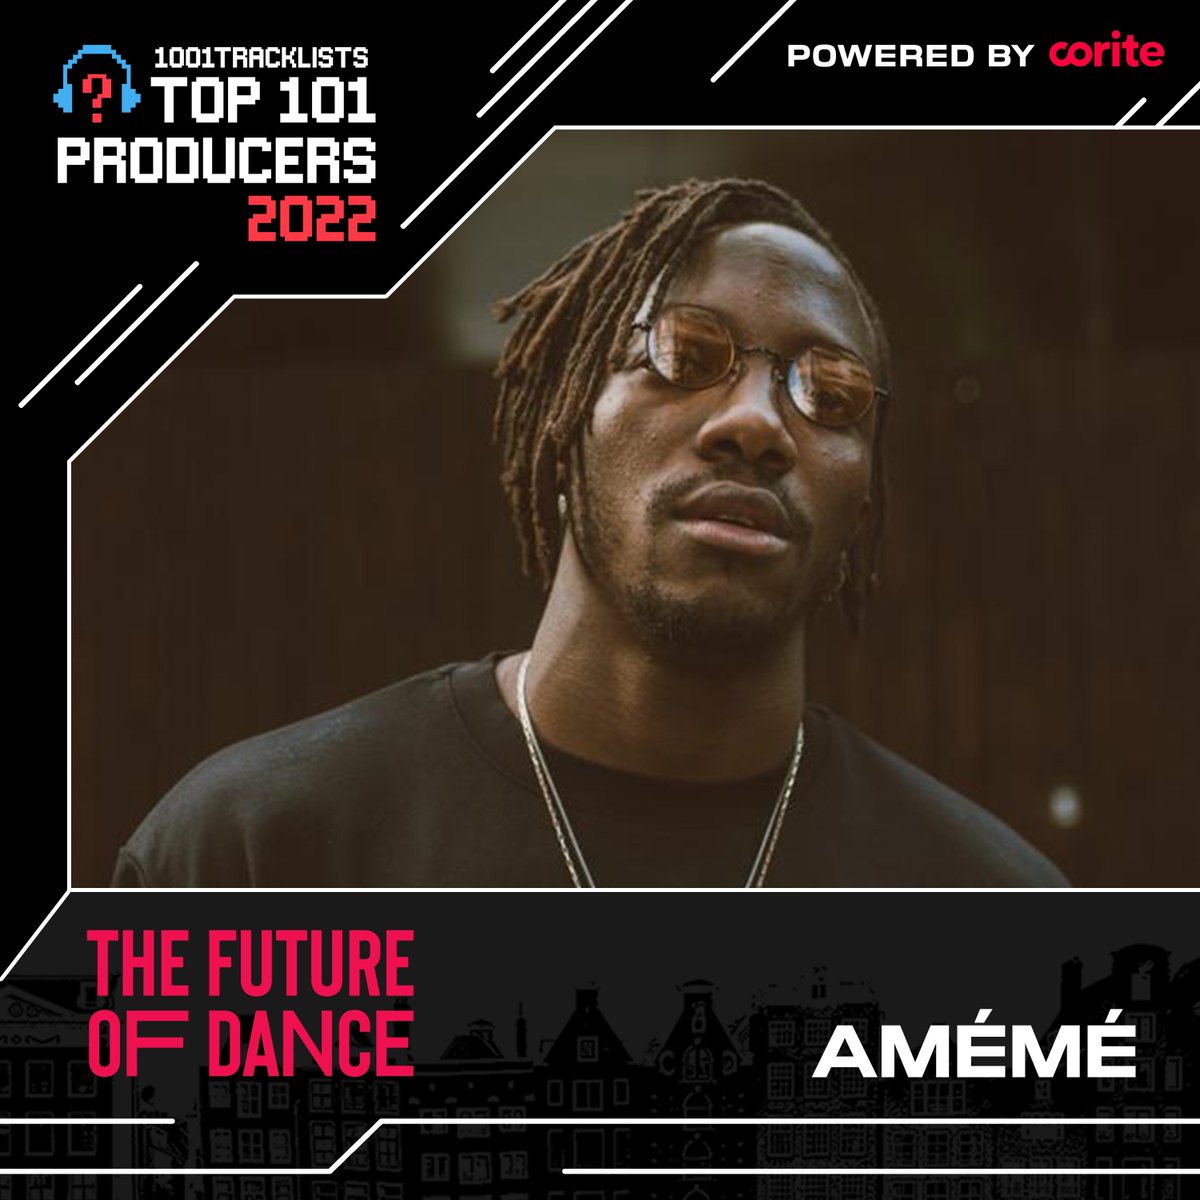 .@djameme's release 'Pliva' together with @JamieJonesMusic on @CercleRecords was a major summer anthem, along with a ton of solo original music and EPs released on his own NYC based label collective One Tribe. #TheFutureOfDance2022 #Top101Producers2022